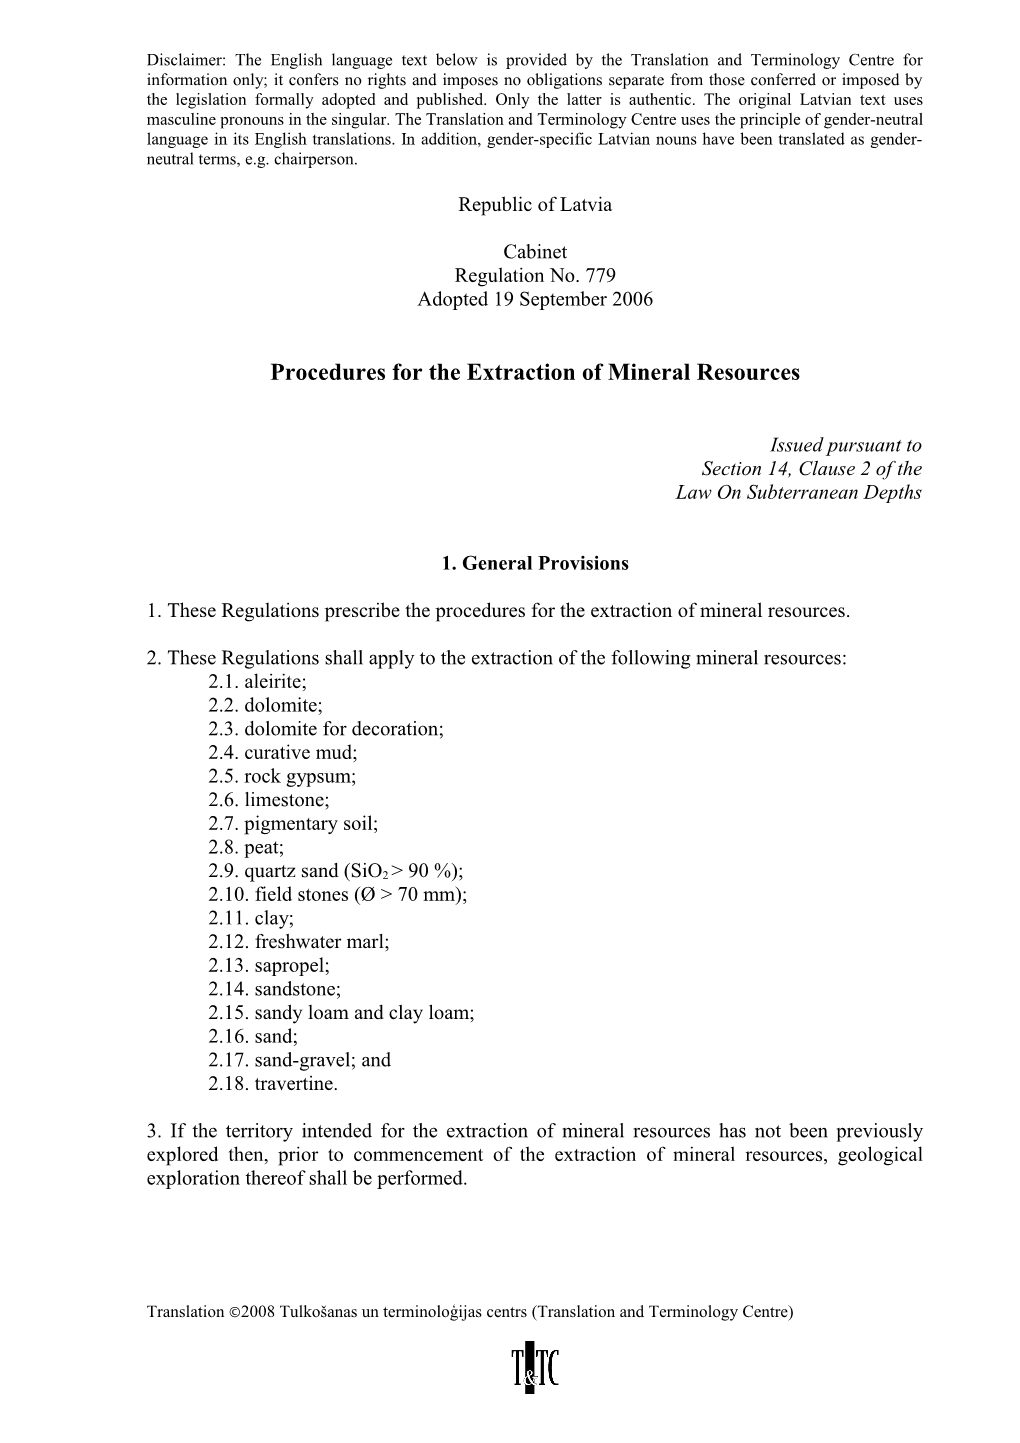 Procedures for the Extraction of Mineral Resources